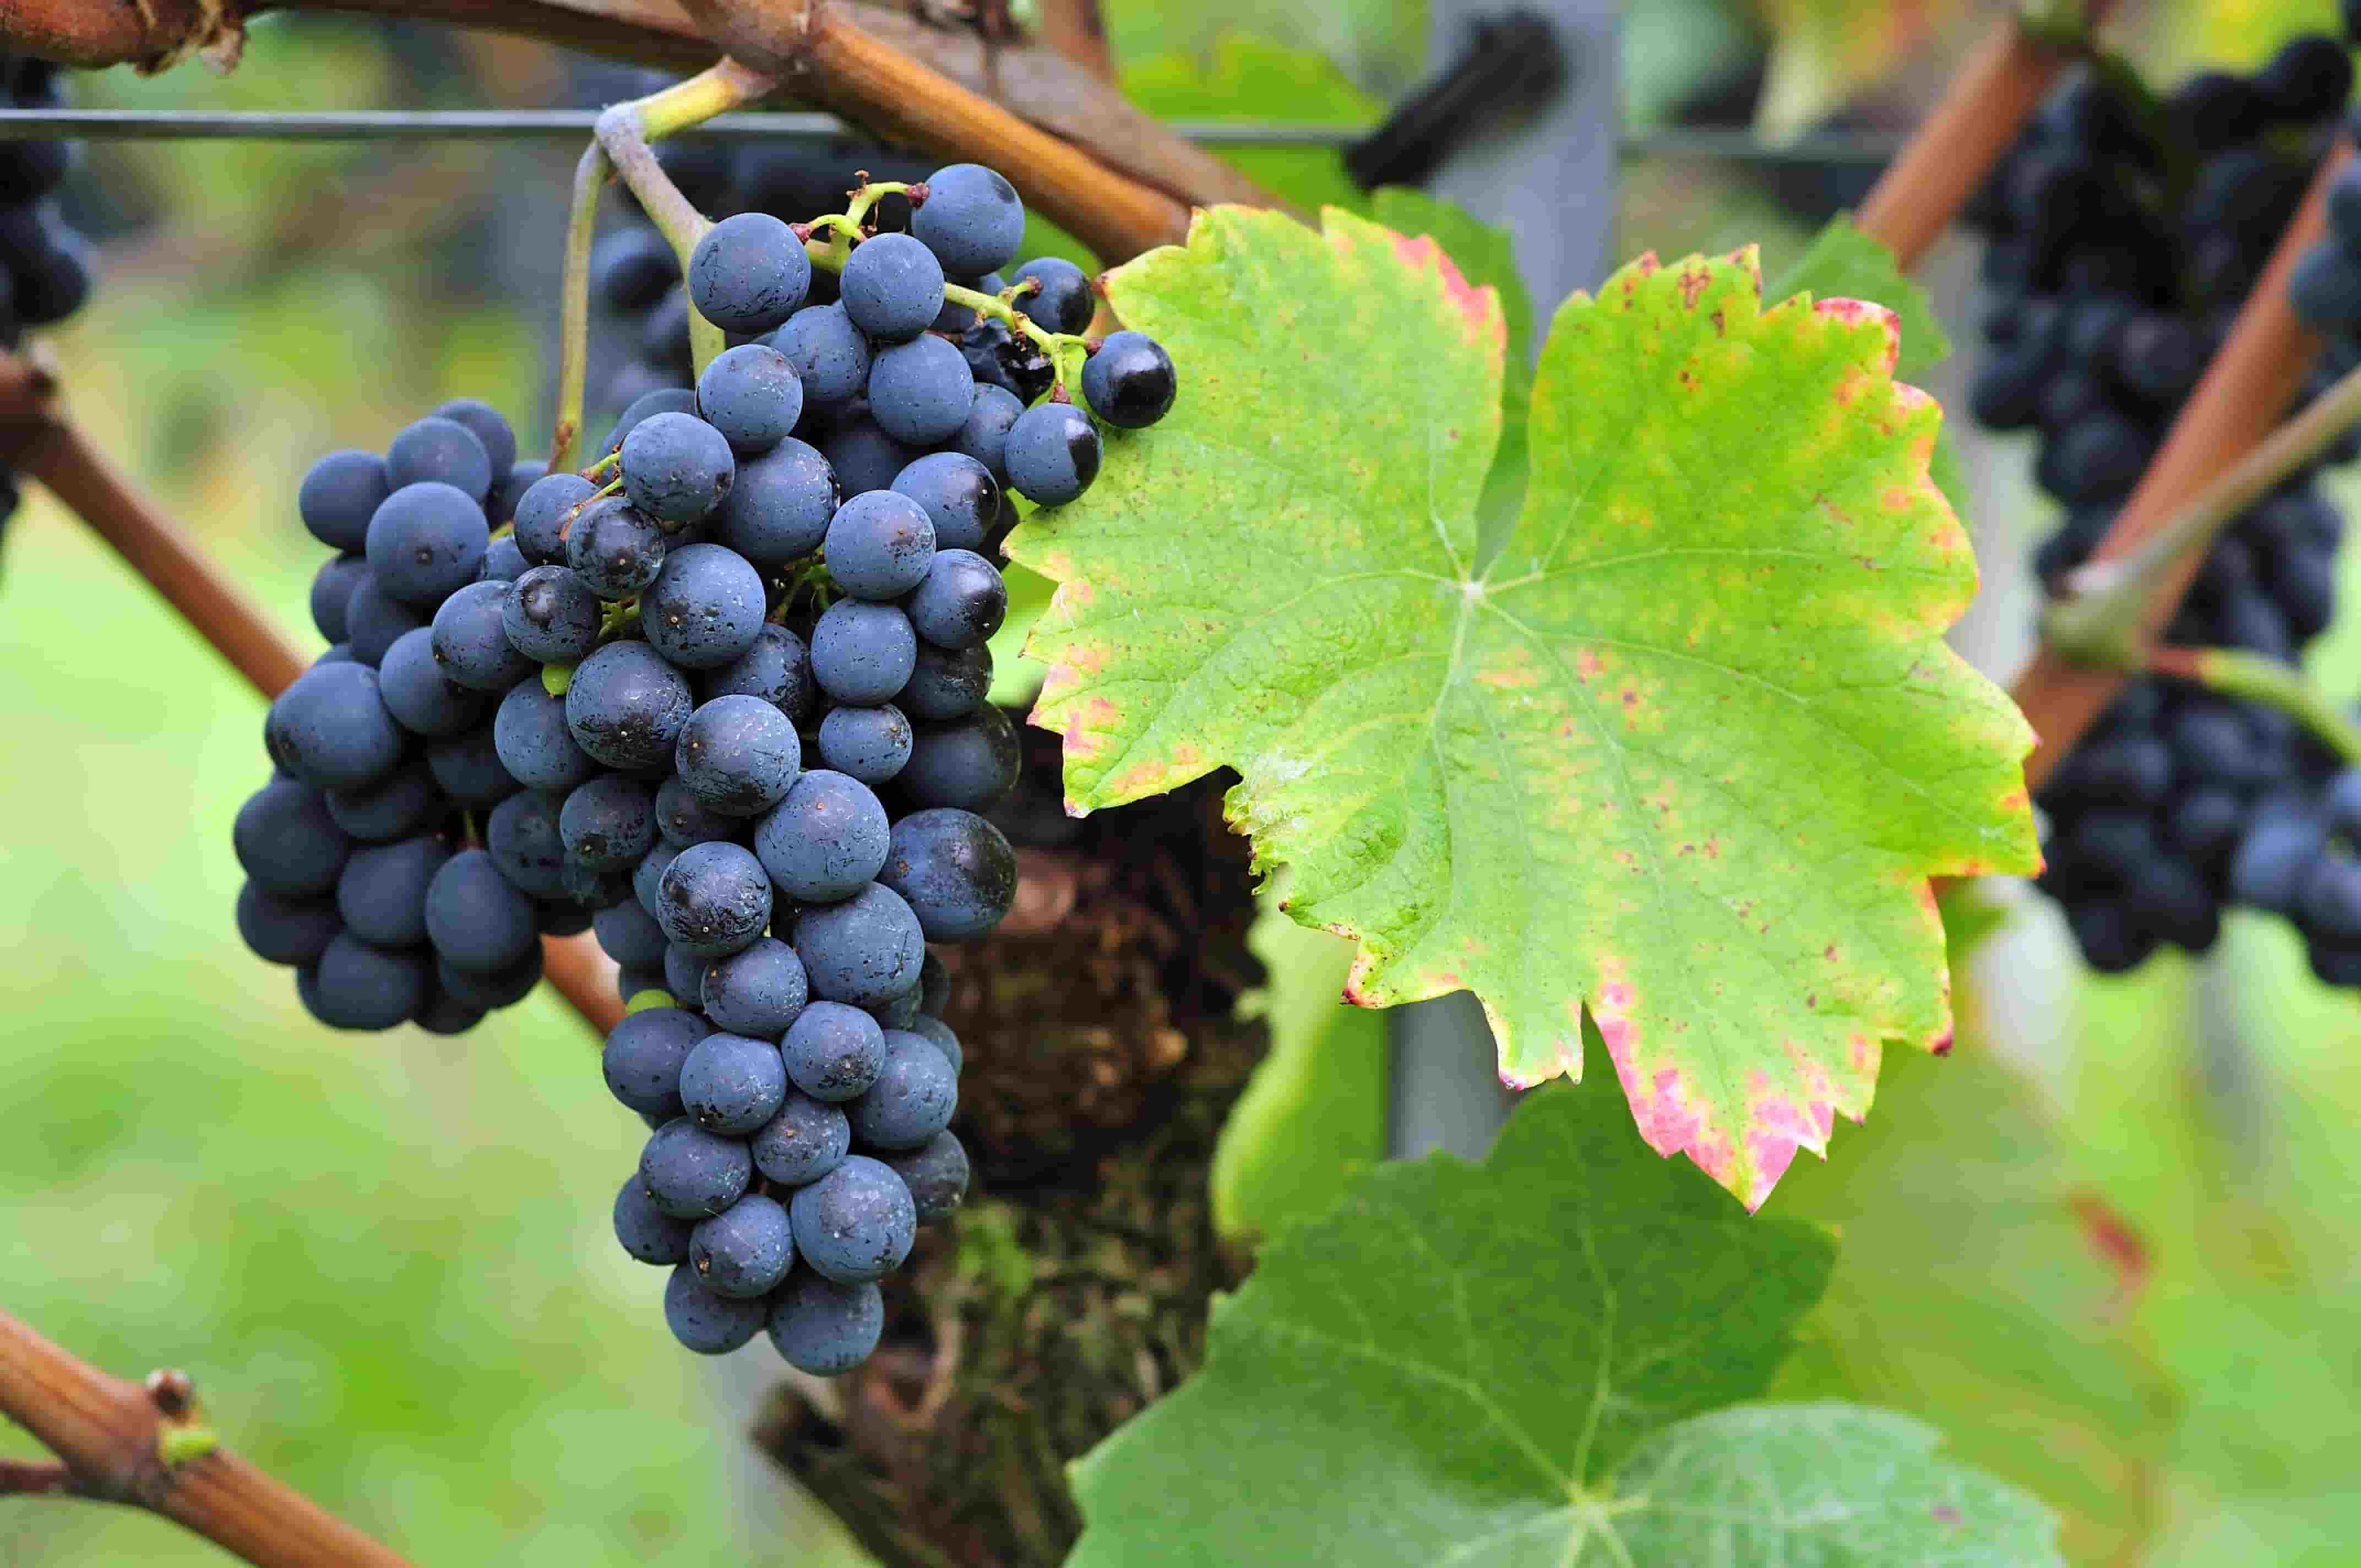 A bunch of dark blue grapes that are relatively small and densely packed.